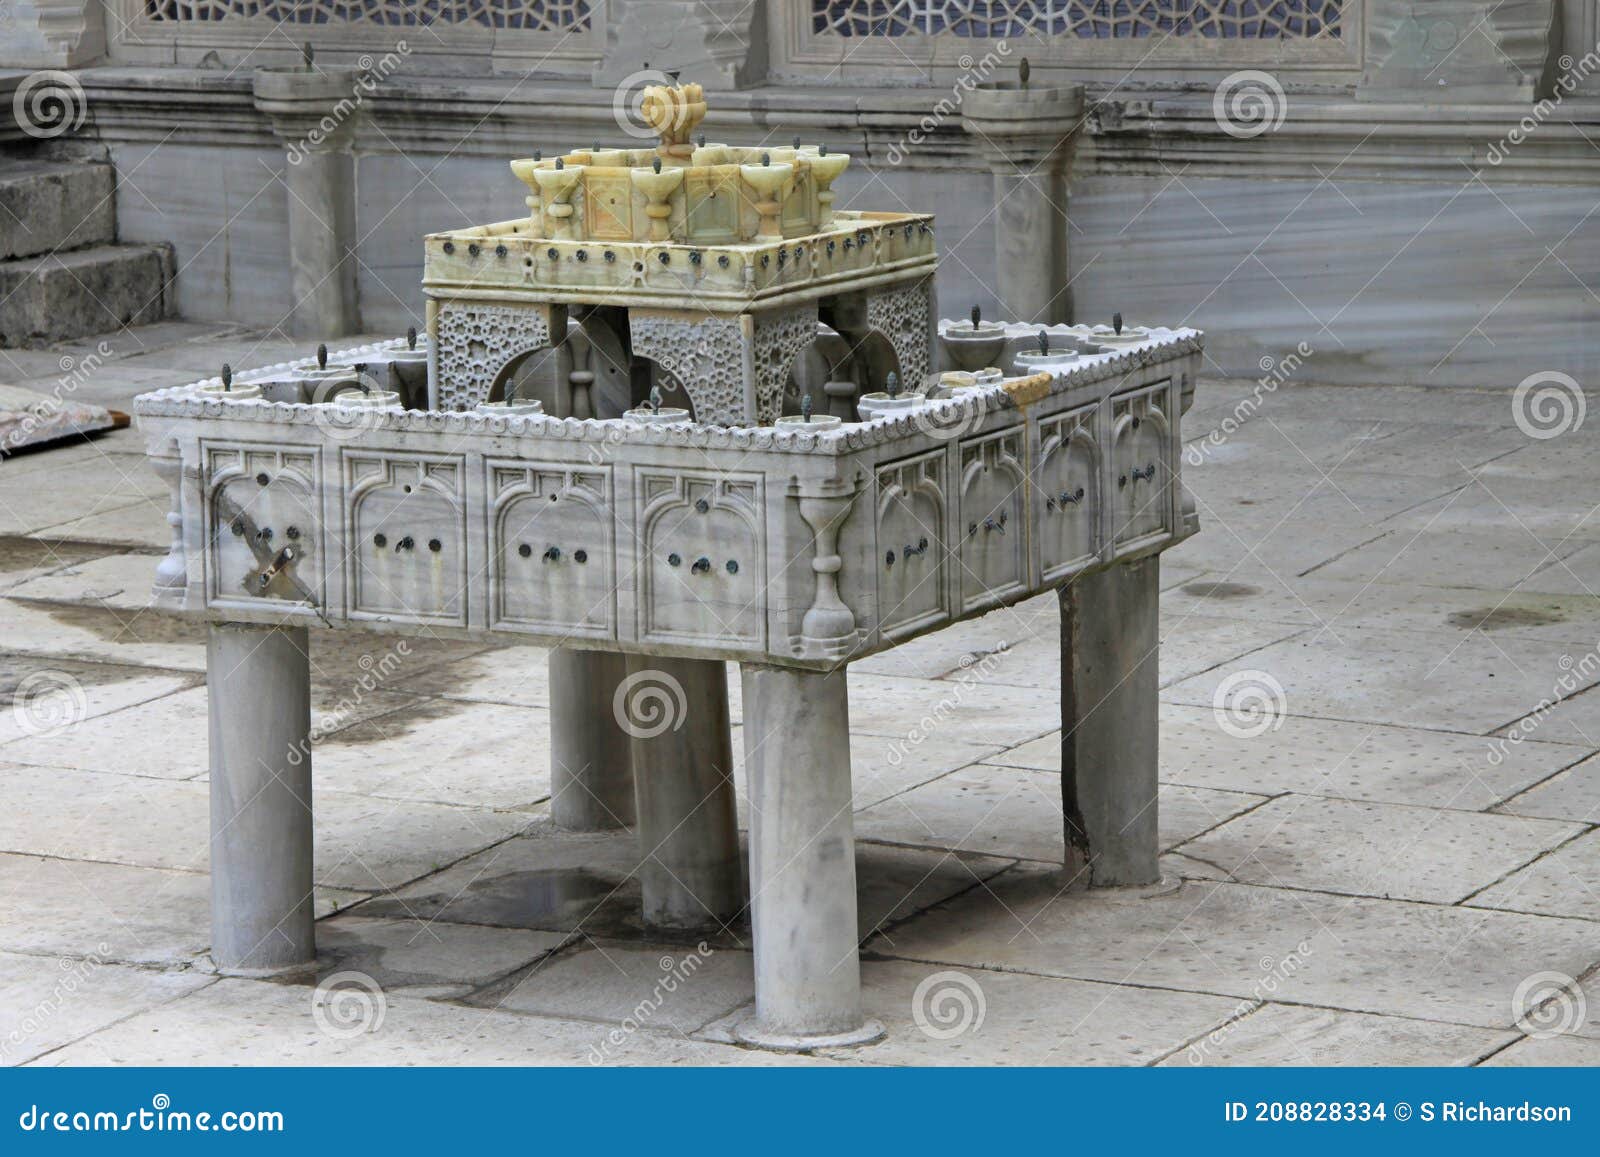 carved marble candle holder in the topkapi palace